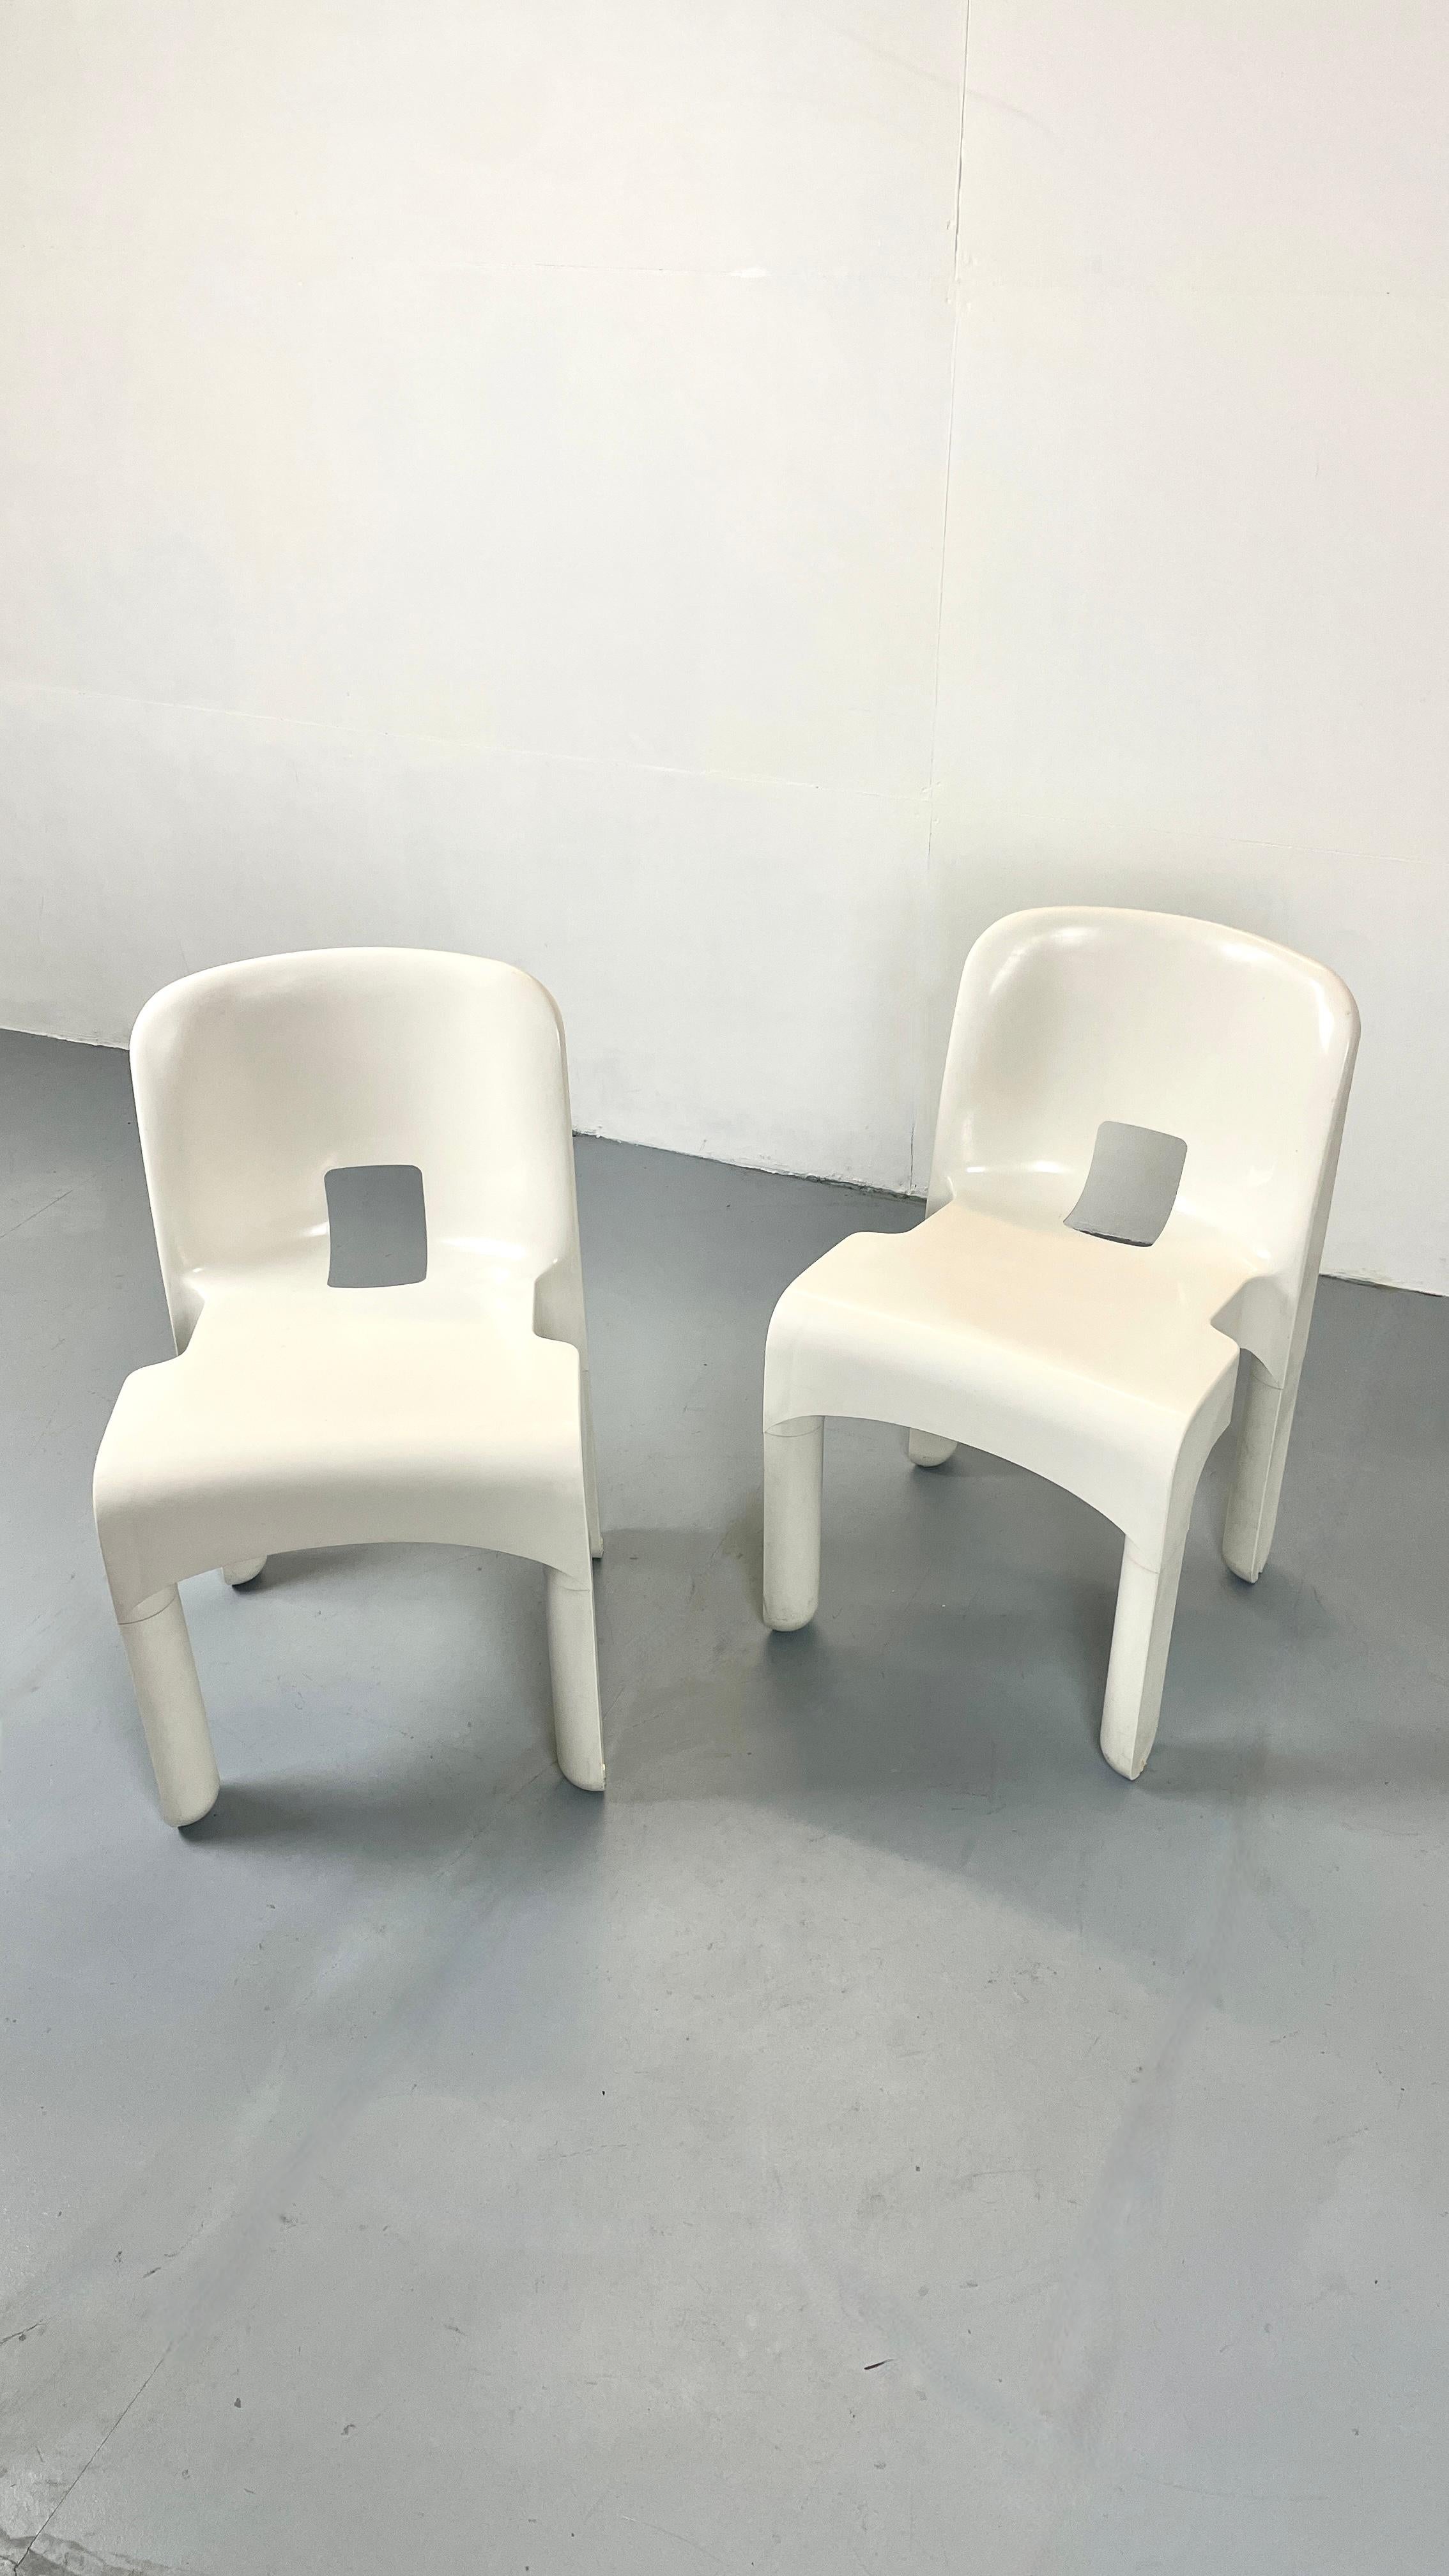 Nice set of two chairs by Joe Columbo. Manufactured by Kartell. 
The Universale chair is one of the first molded plastic chairs created. 
The chairs are in very good vintage condition. Stamped by Kartell, Italy.

A true Space Age Icon.